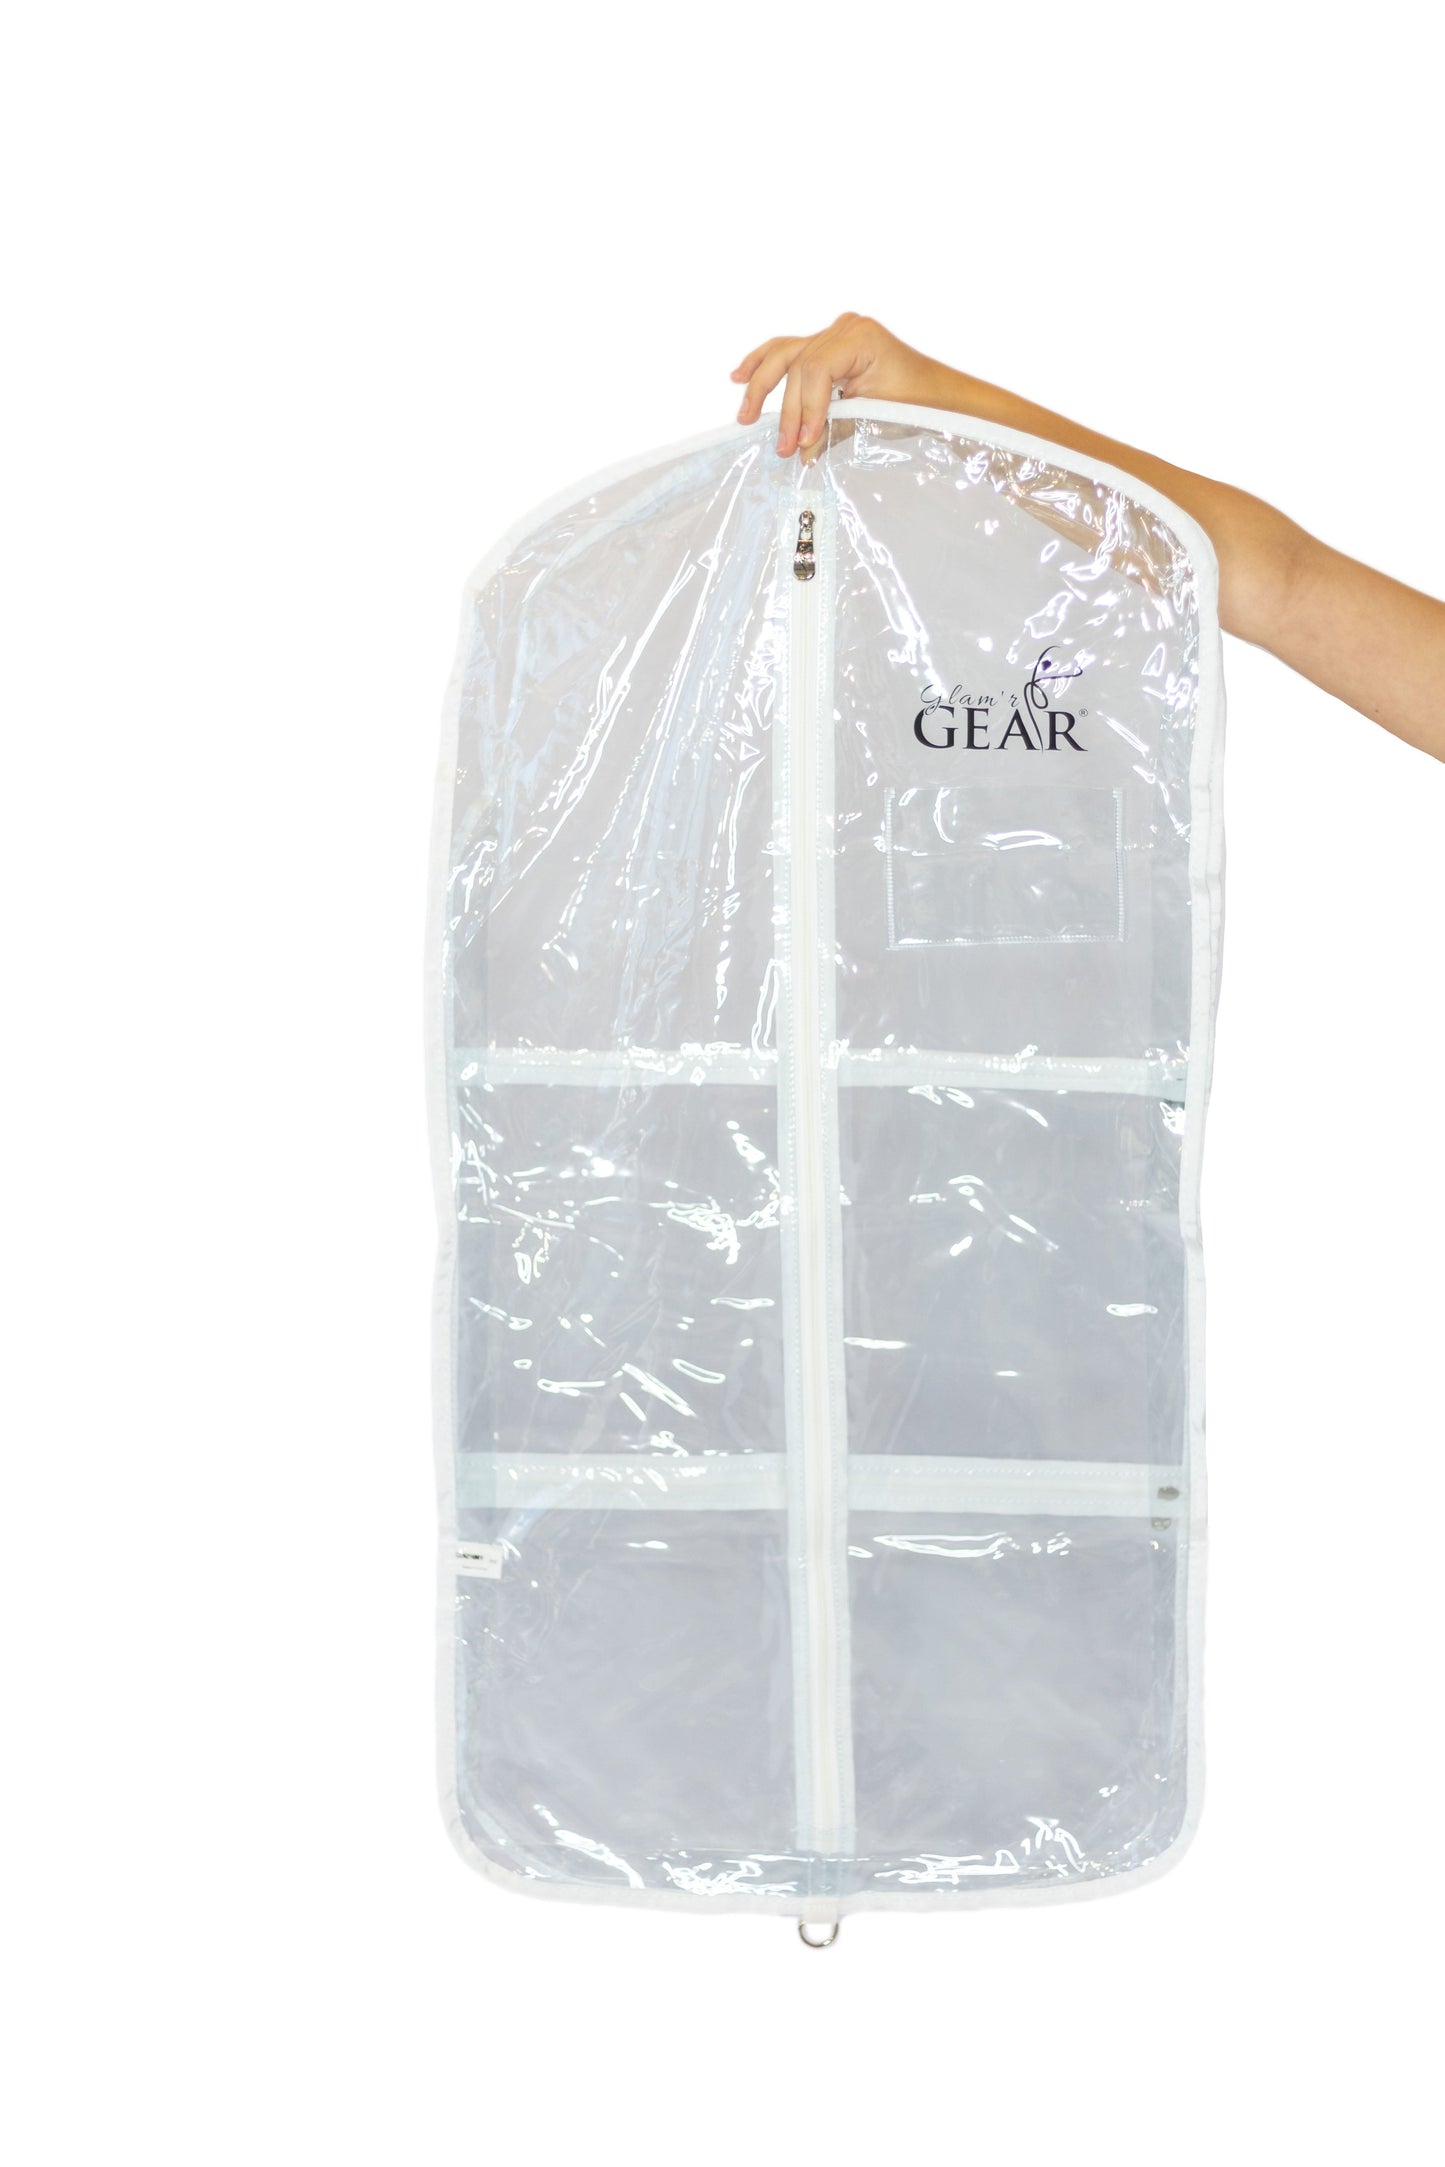 Glam'r Gear Garment Bags (Hangers Sold Separately) - Glamr Gear